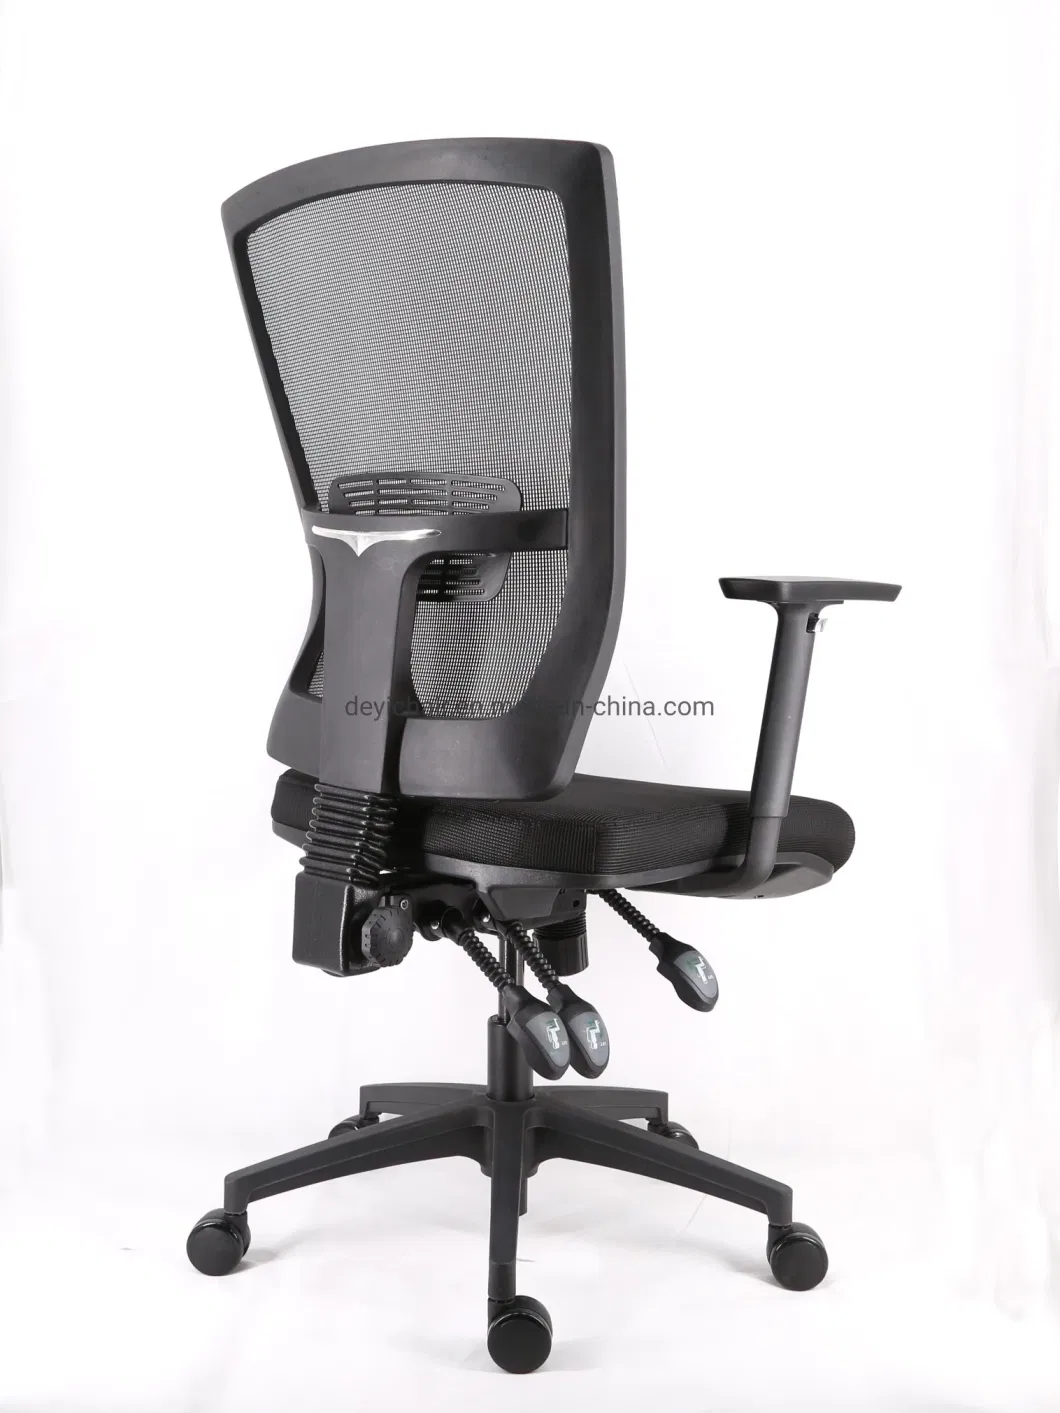 3 Lever Heavy Duty Mechanism BIFMA Standard Nylon Base and PU Castor with Adjustable Arms and Lumbar Support Office Chair